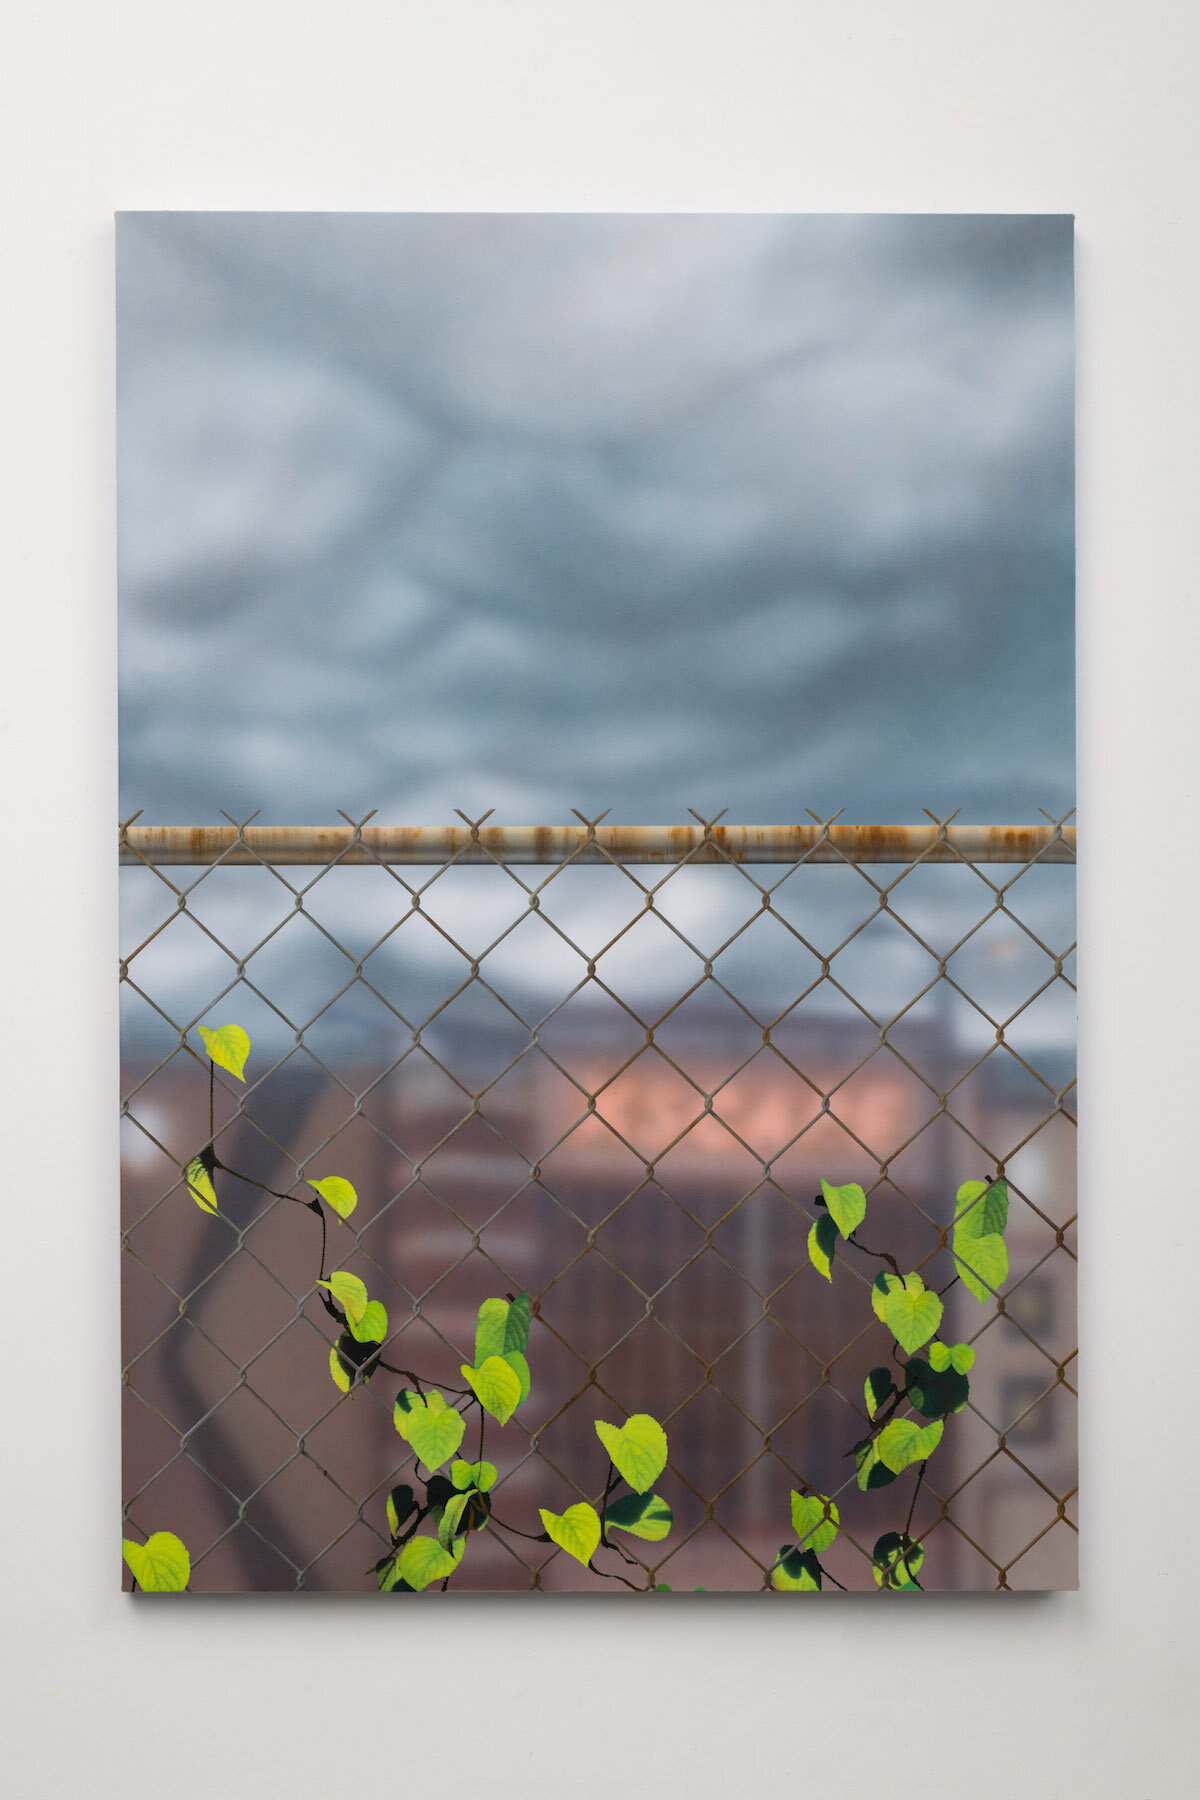   Xscape with Chain Link and Ivy,  2018. Acrylic on canvas. 72 x 50 inches 